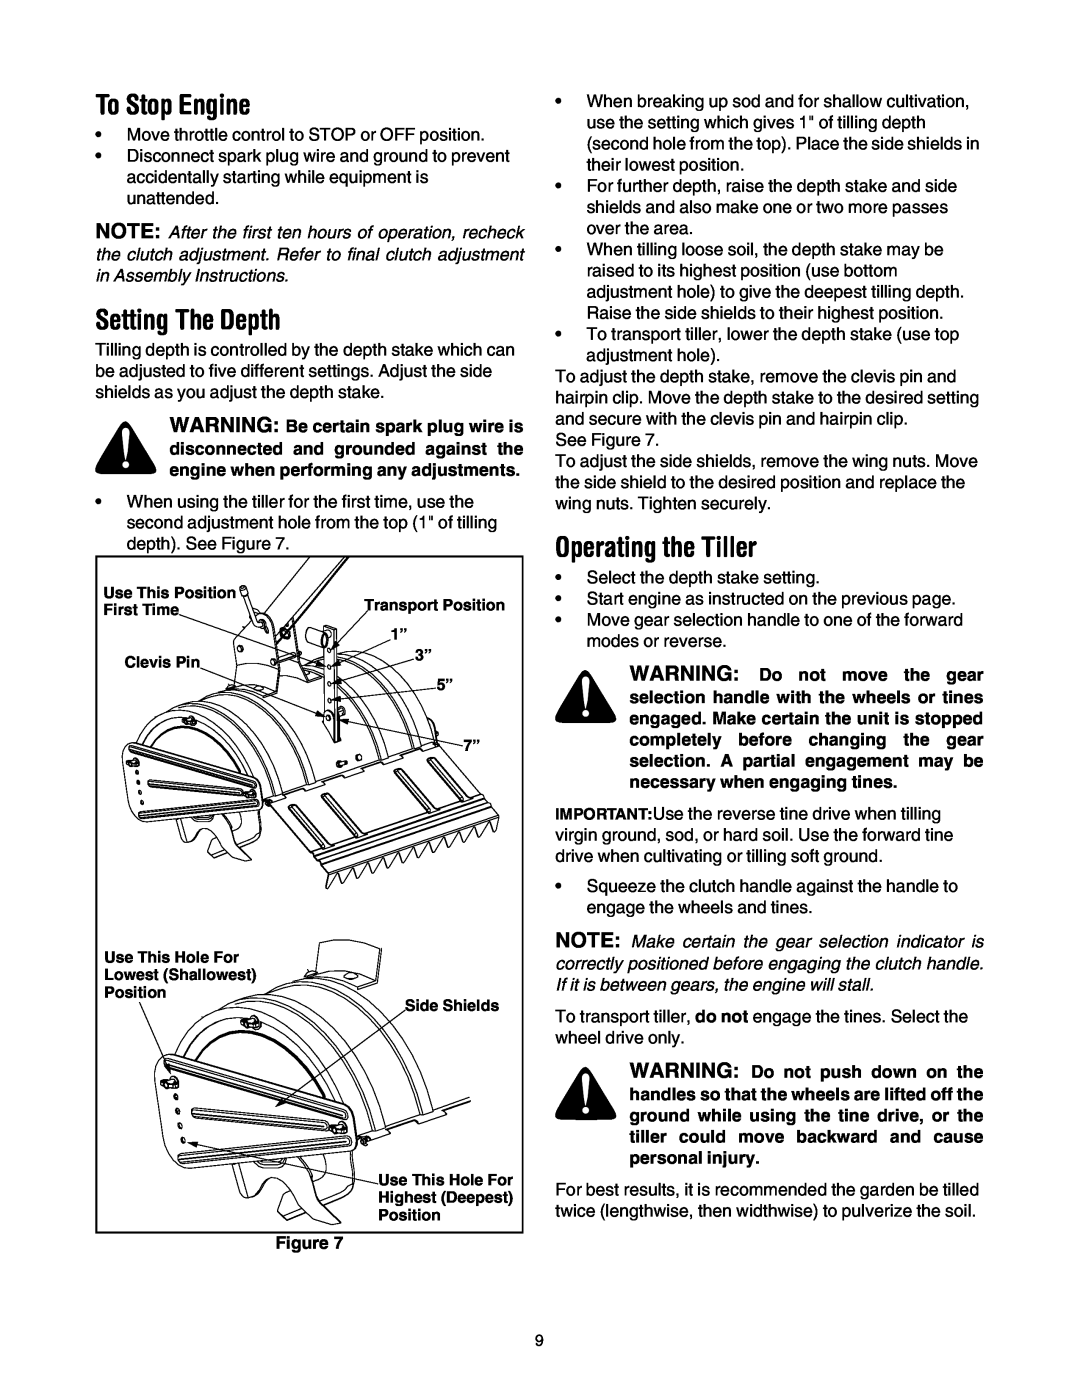 White Outdoor 454 manual To Stop Engine, Setting The Depth, Operating the Tiller 